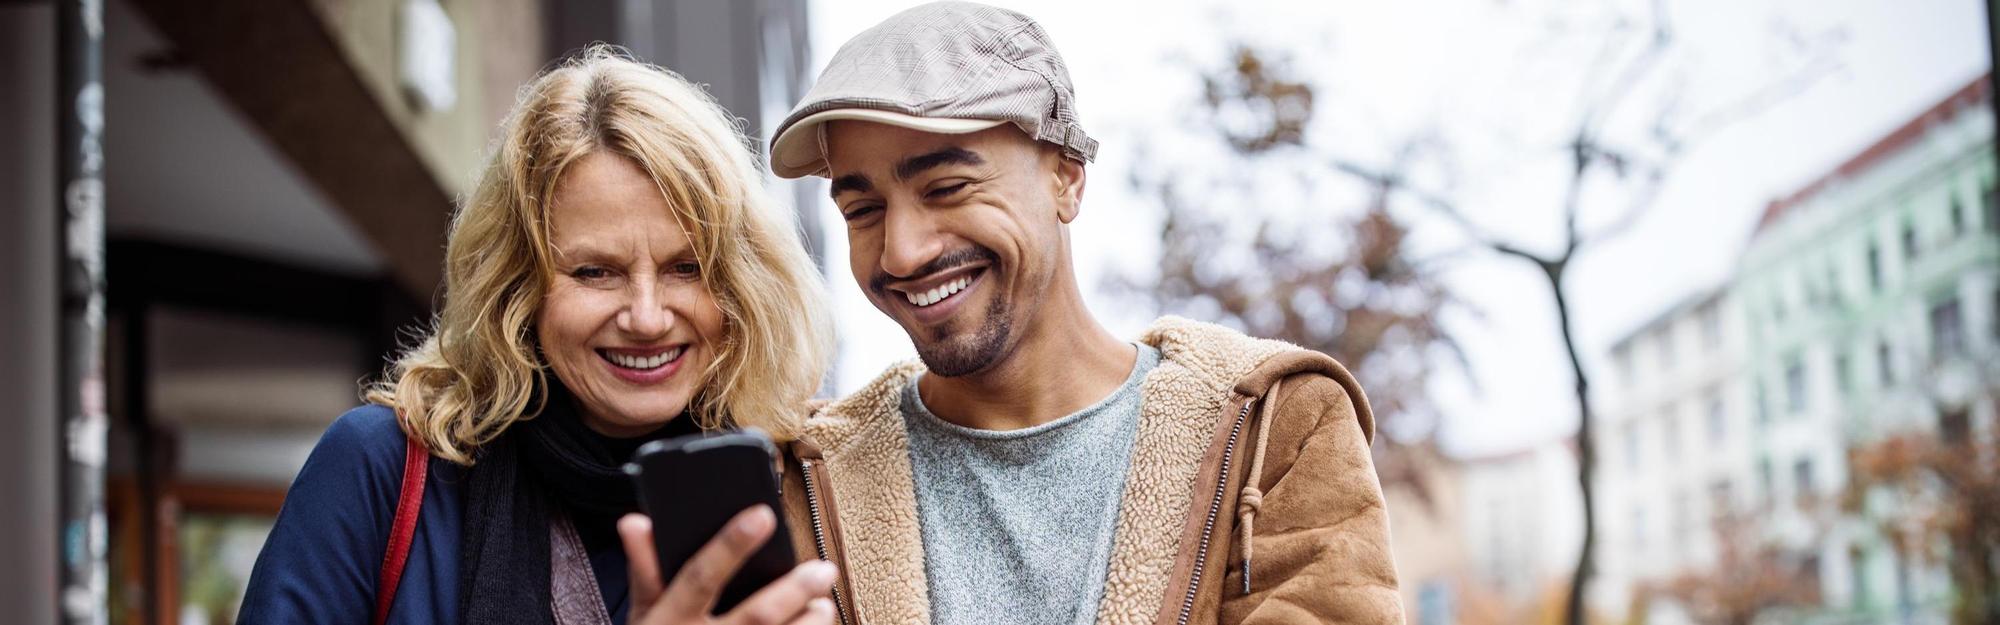 Happy man showing mobile phone to friend